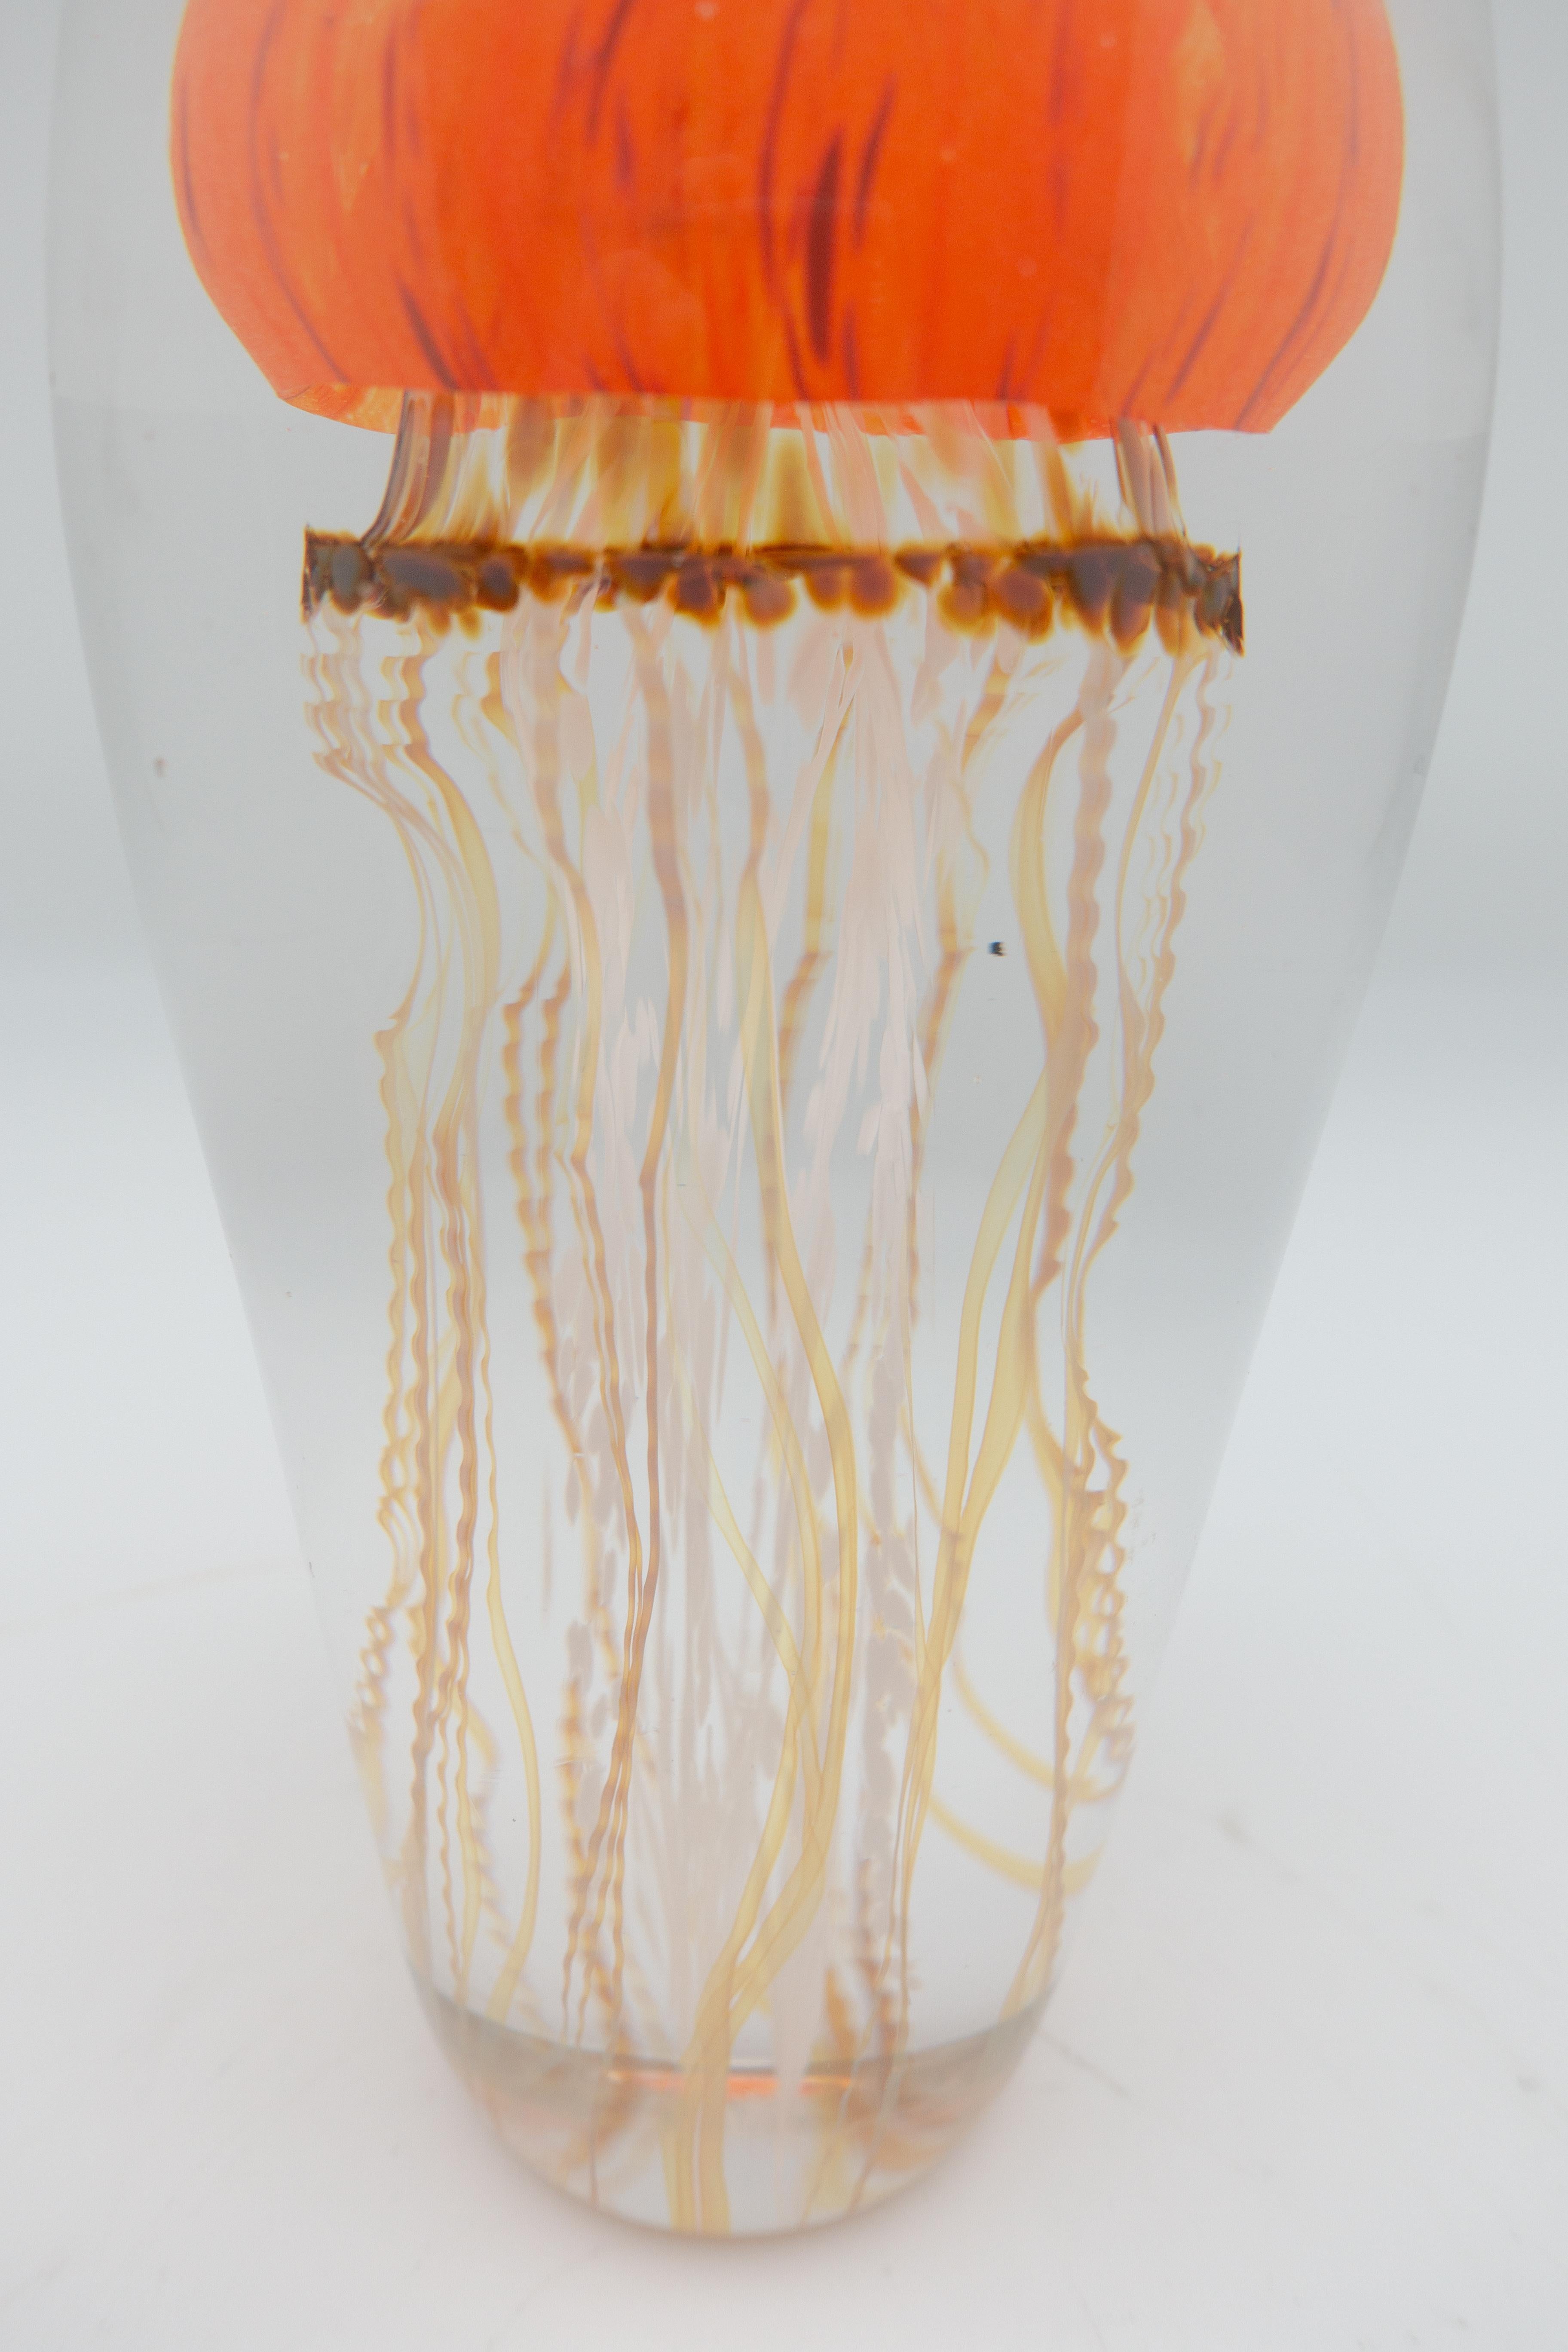 Other Sunrise Glass Jellyfish Sculpture For Sale